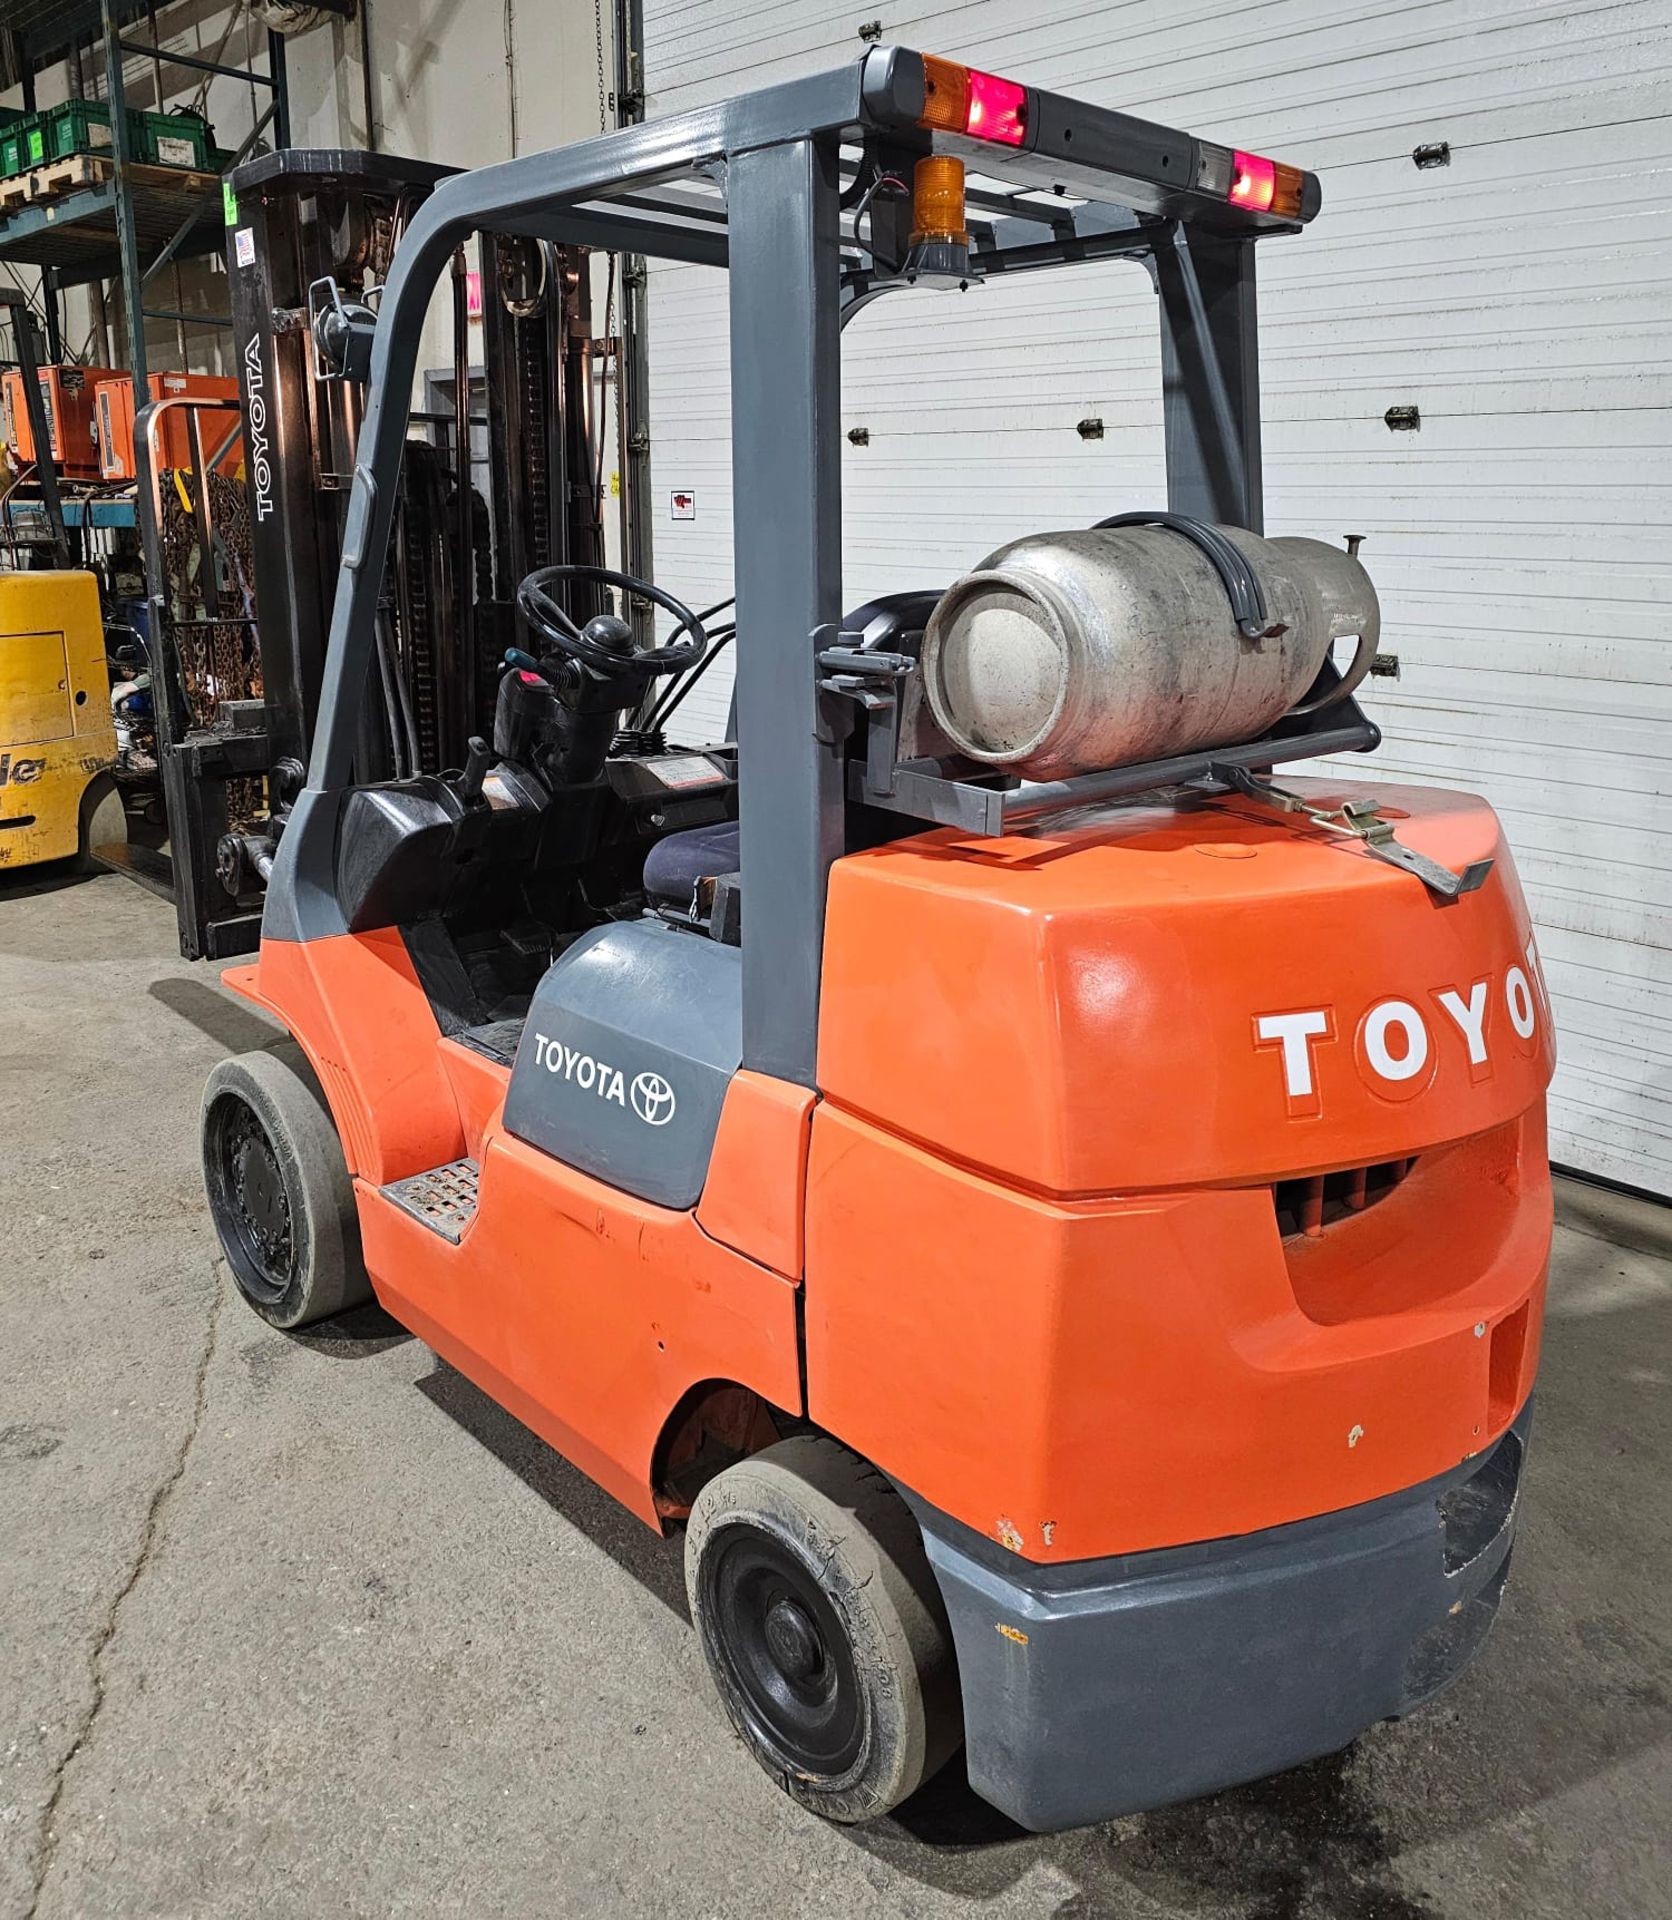 Toyota 7,000lbs Capacity LPG (Propane) Forklift with sideshift 60" Forks & 3-STAGE MAST 187" load - Image 2 of 5